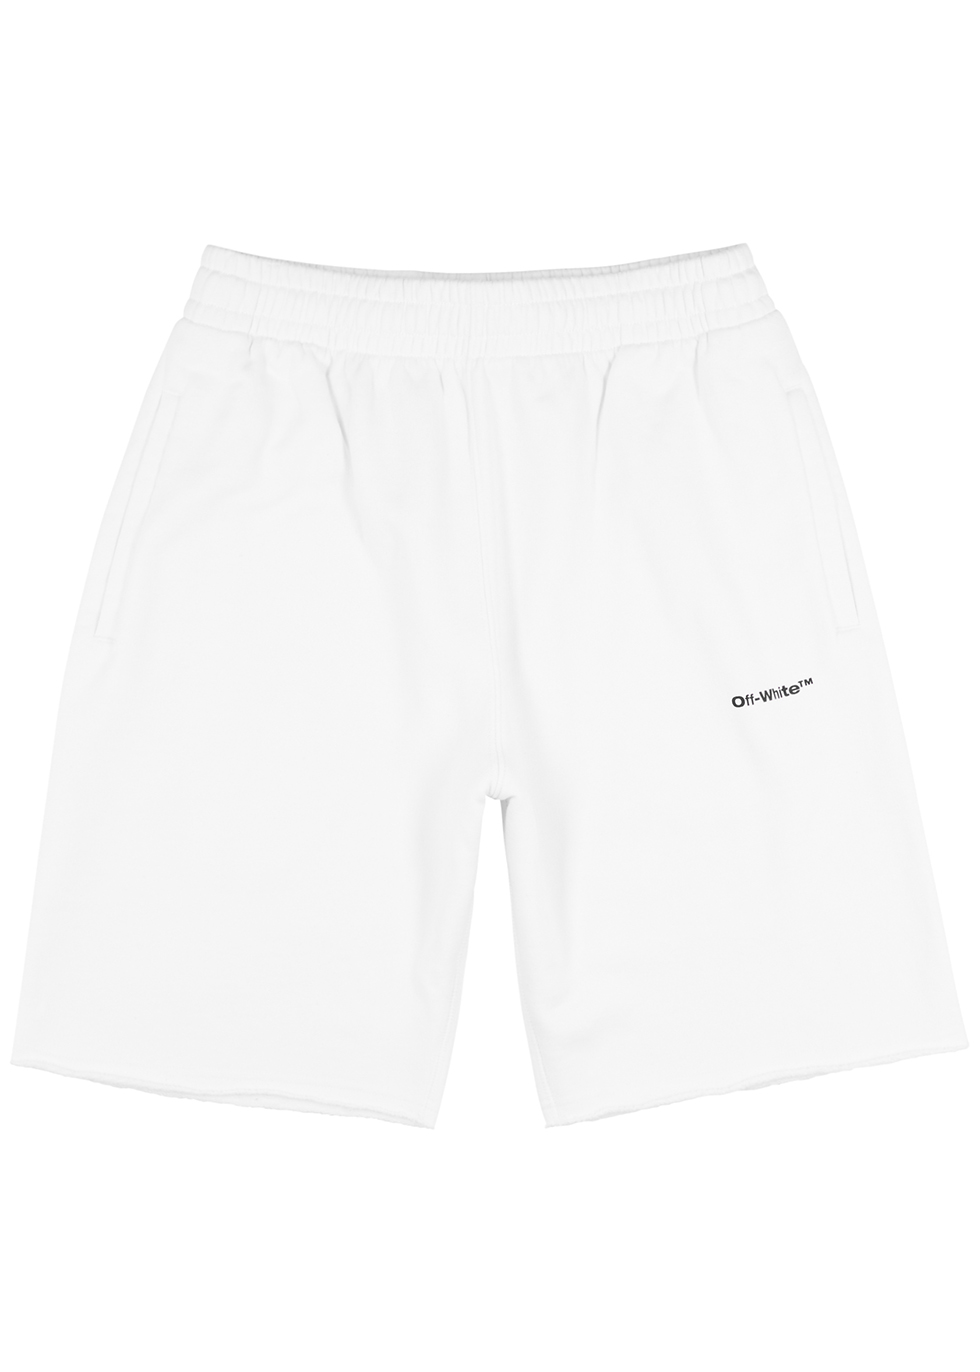 Off-White Wave Outline white cotton shorts